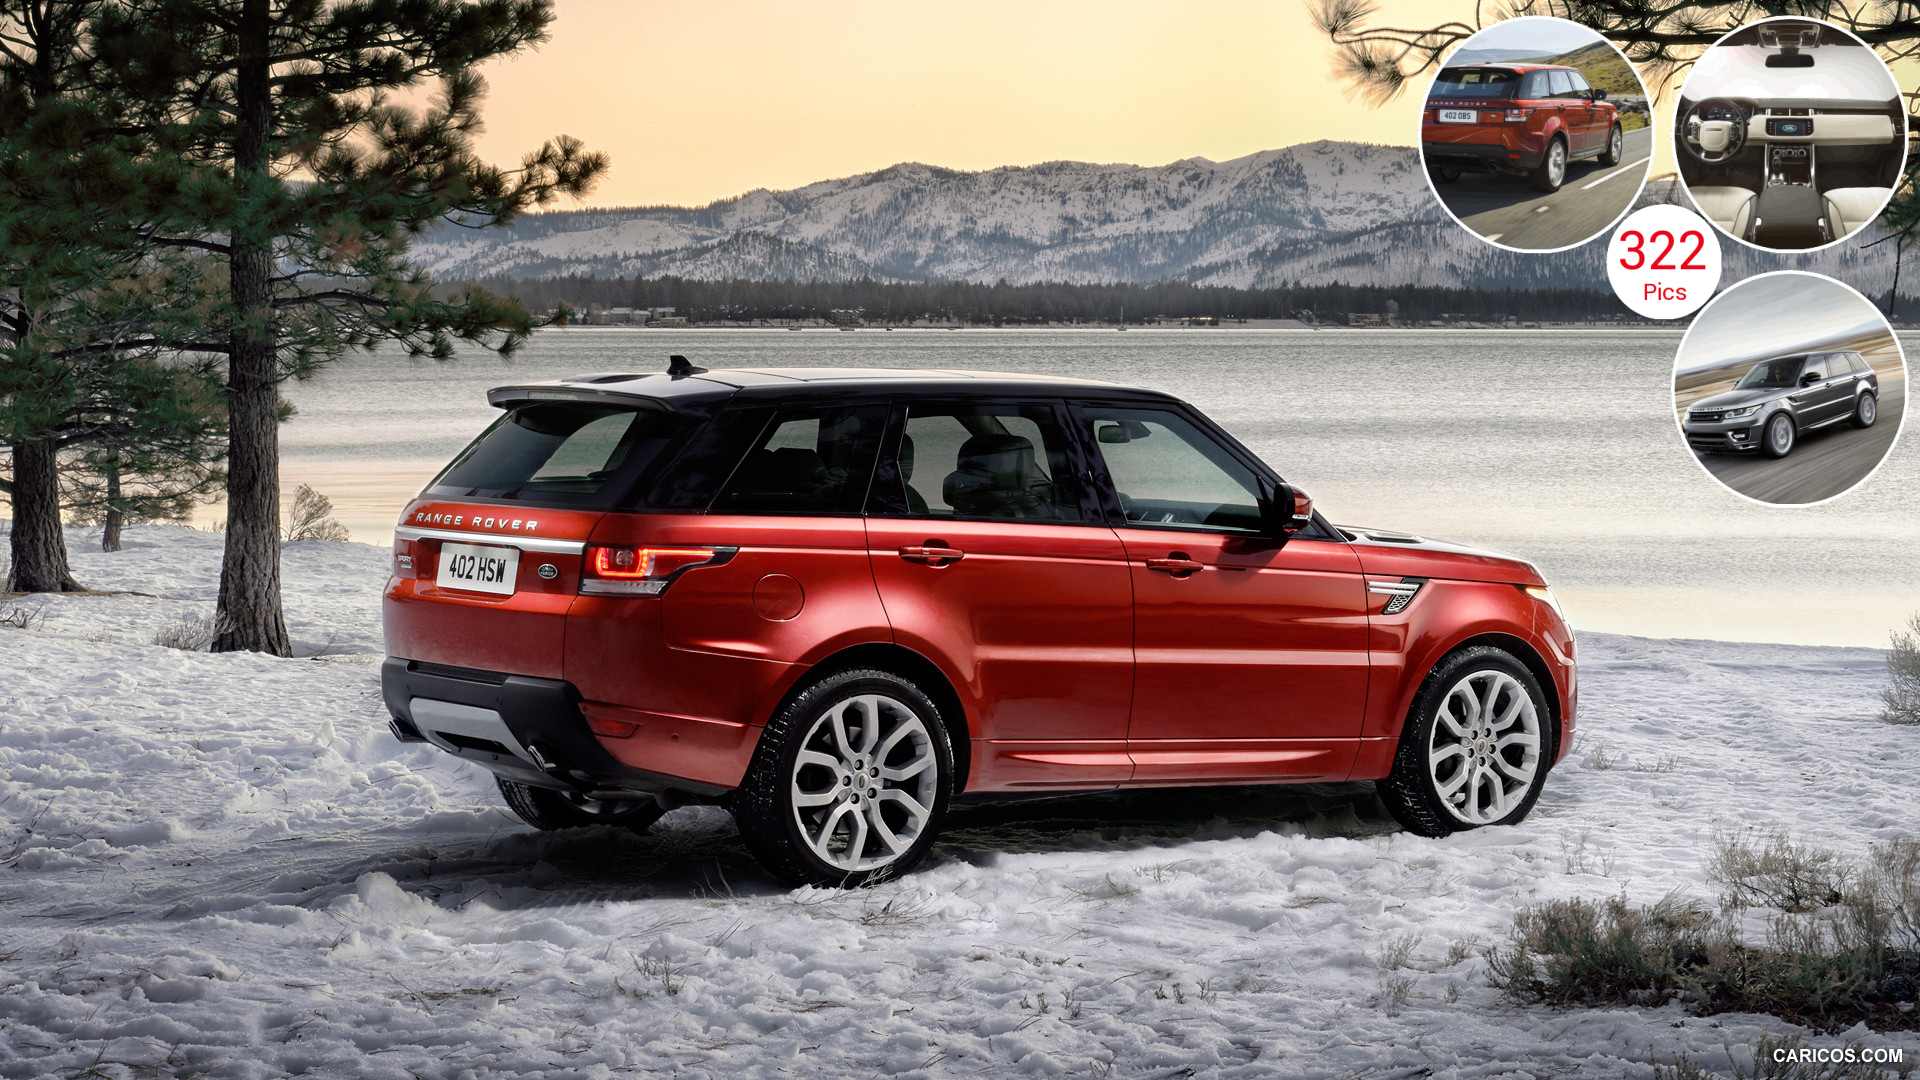 2014 Range Rover Sport Chile Red - Side | HD Wallpaper #37 | 1920x1080